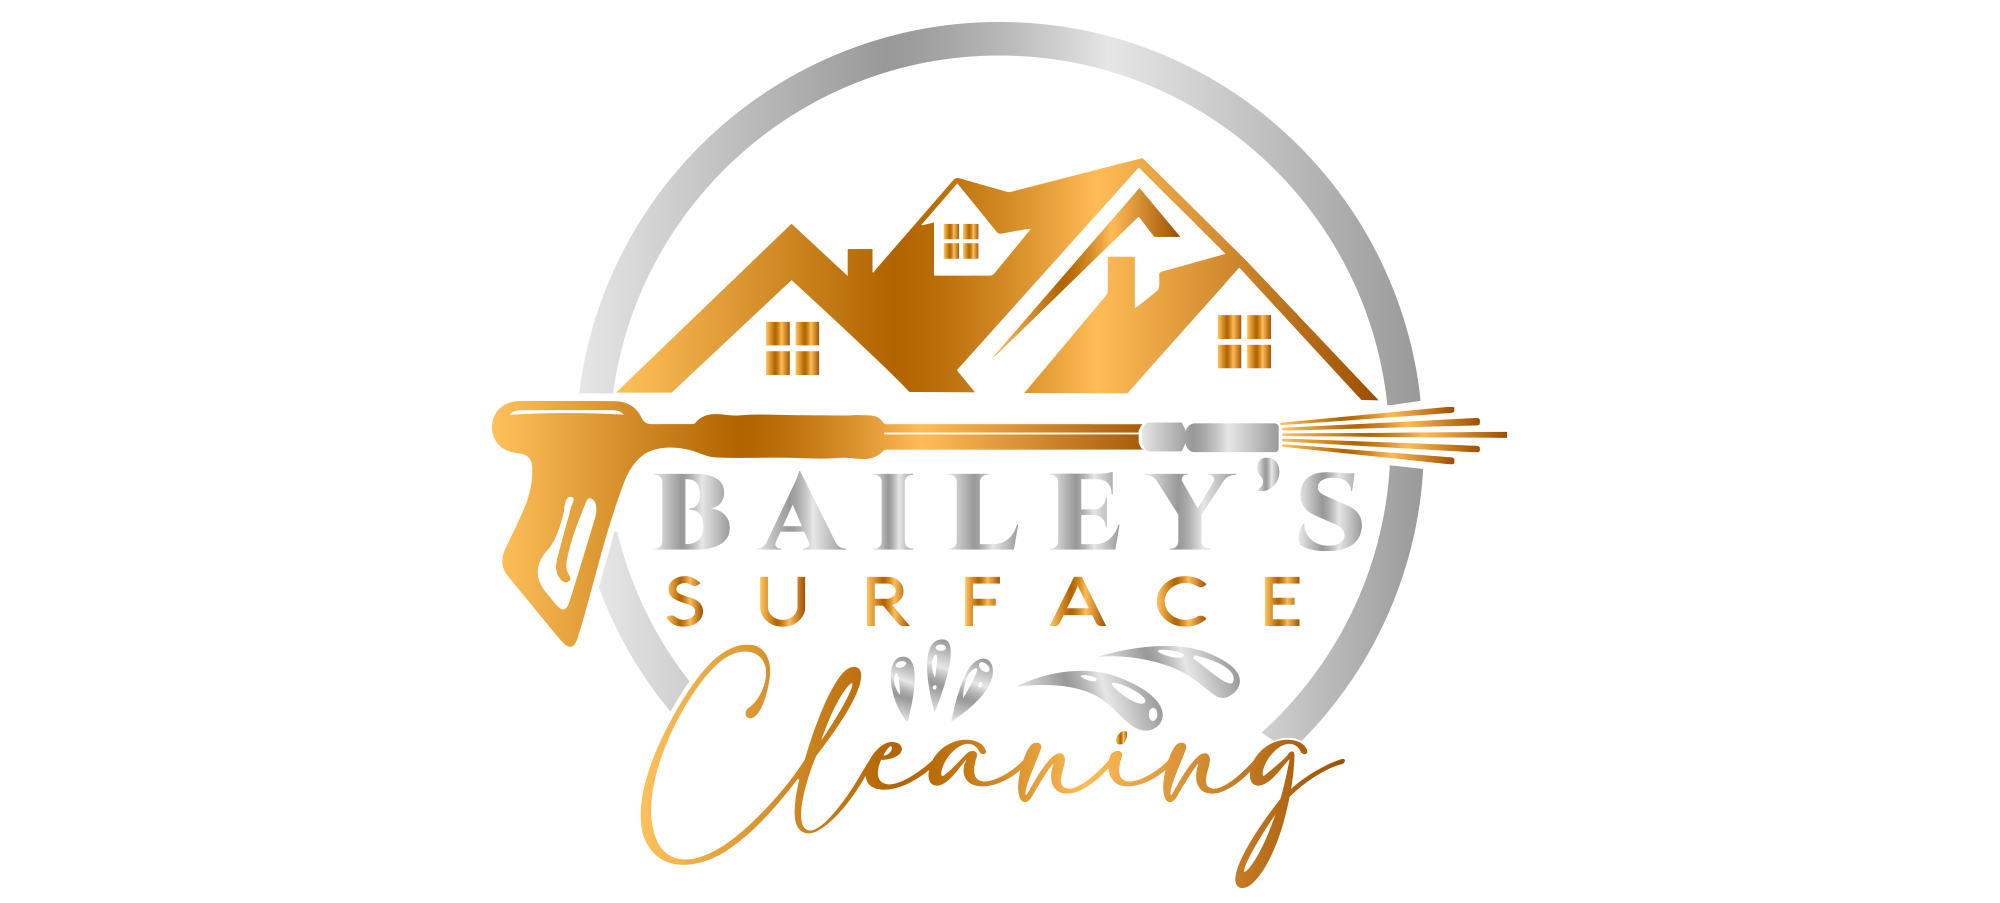 Bailey's Surface Cleaning, LLC